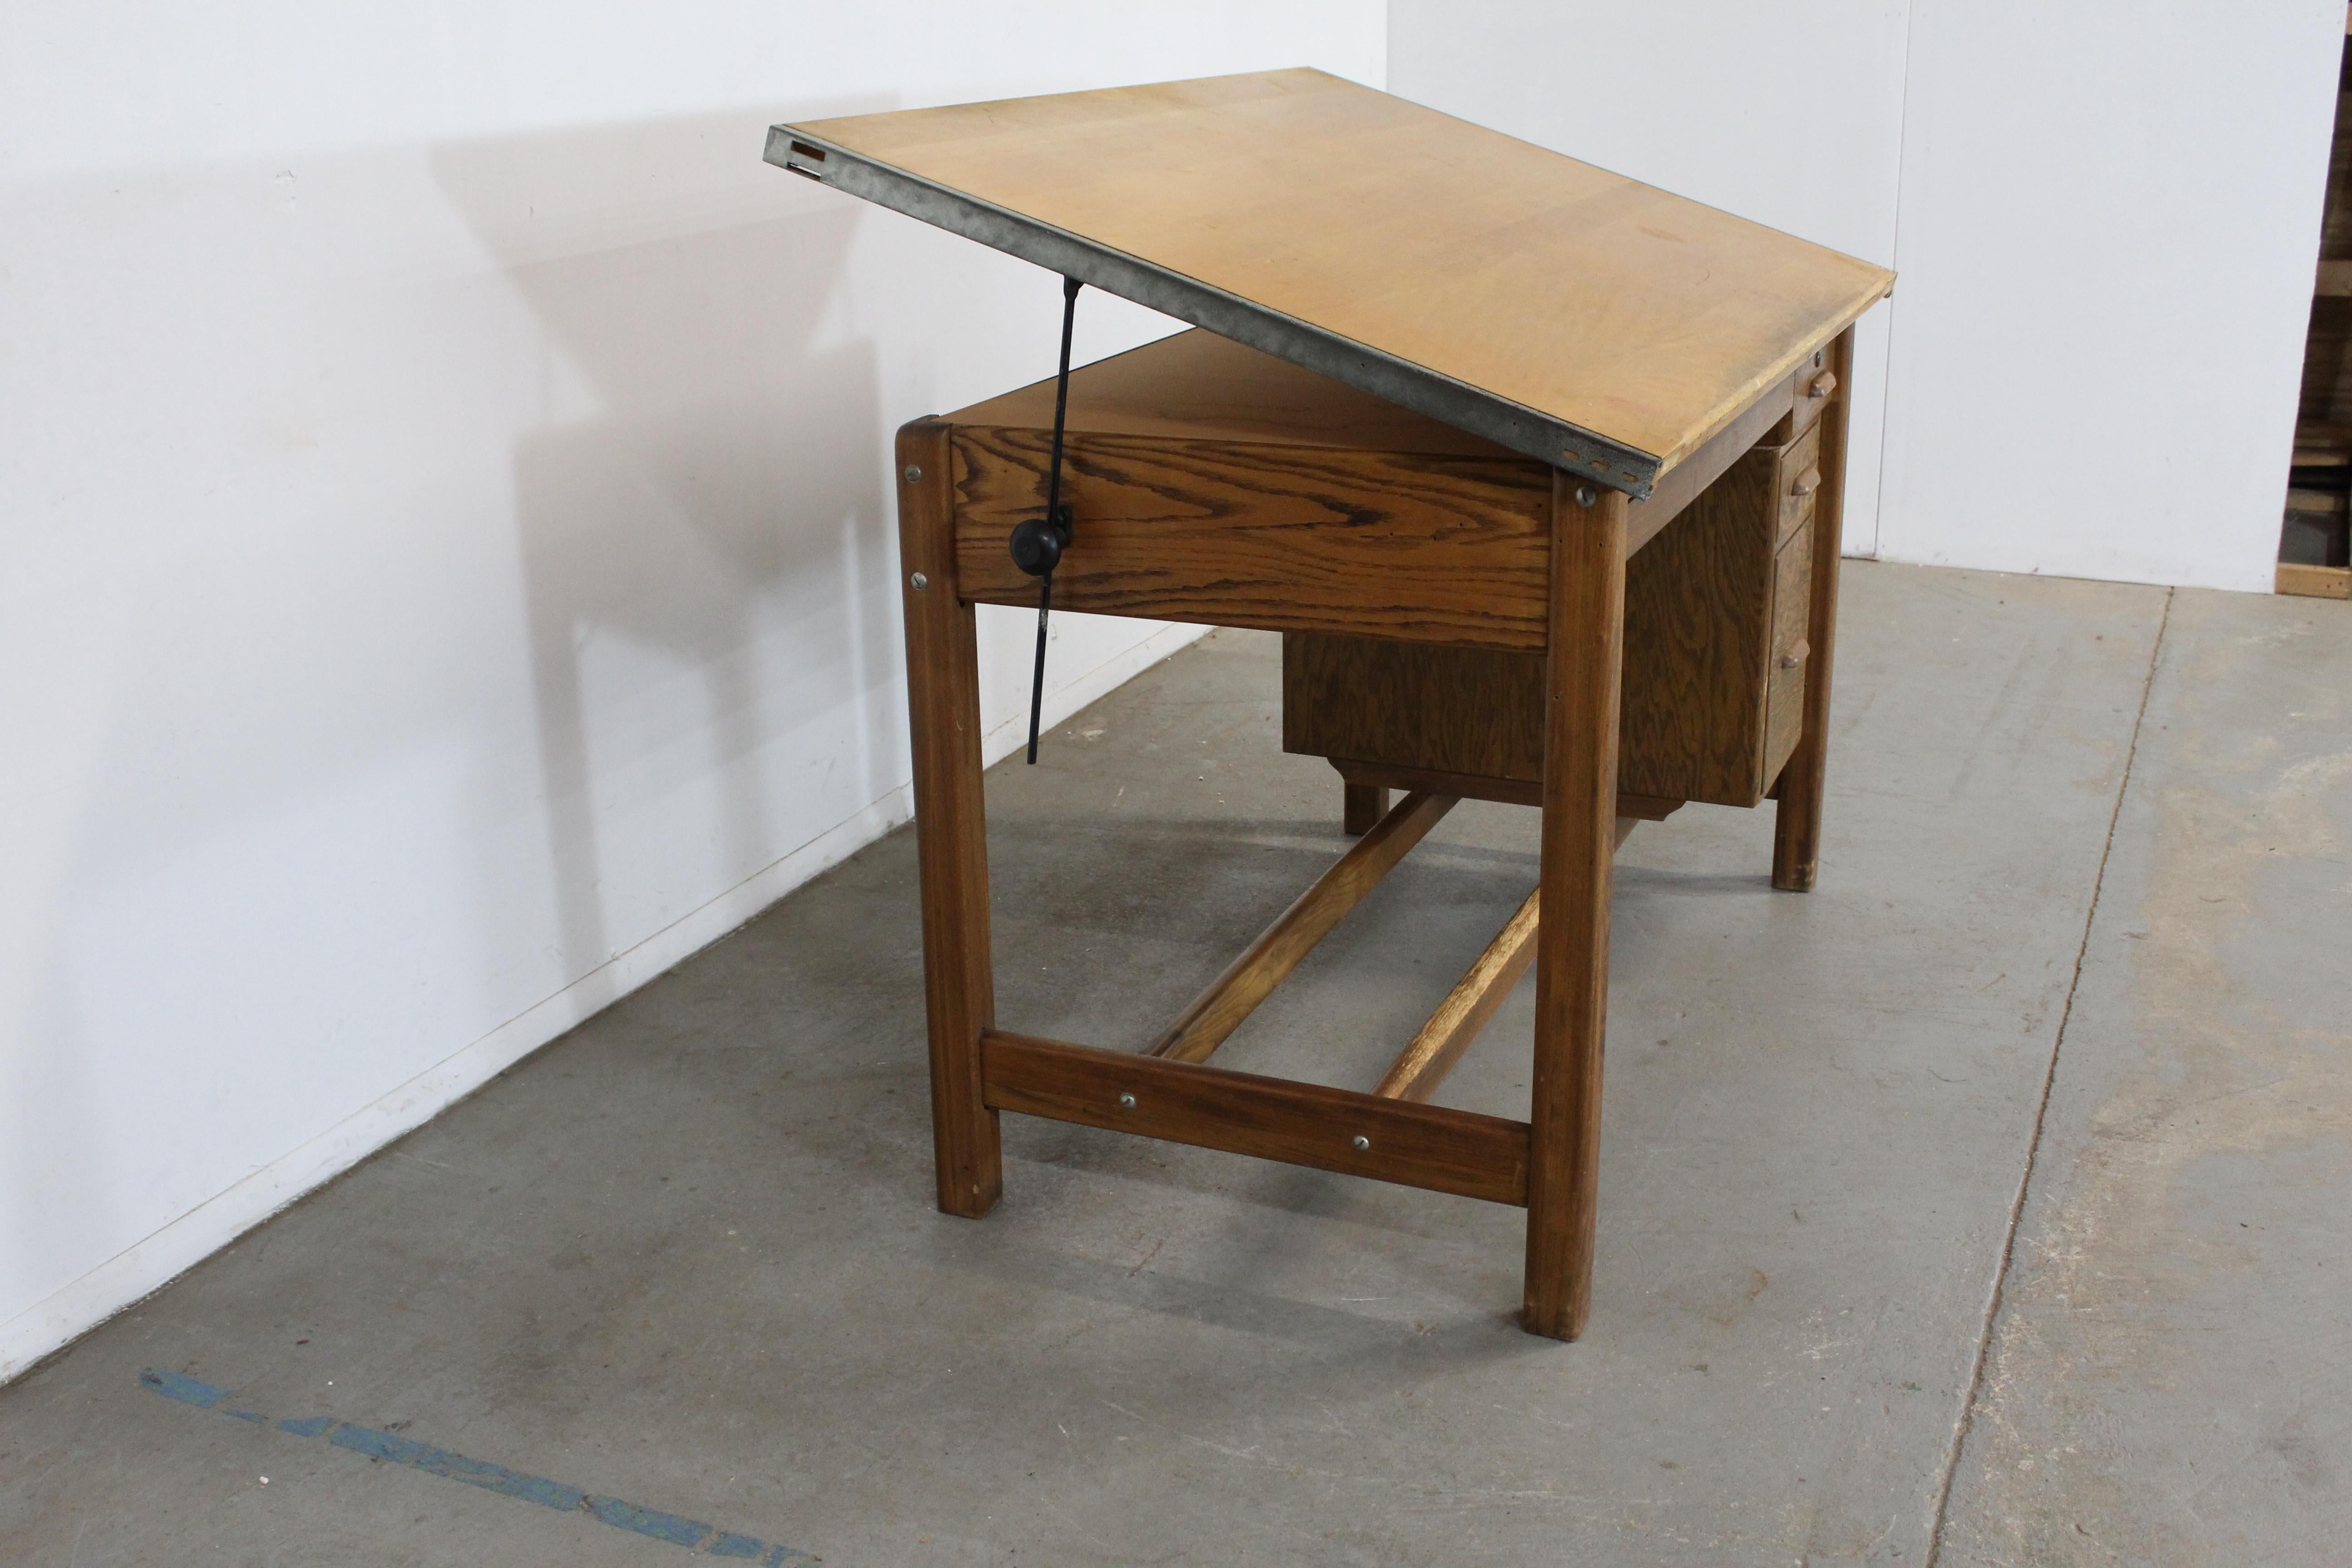 Vintage Industrial Adjustable Wood Drafting Table Desk

Offered is a vintage, adjustable drafting table from the 1960's, made of wood (Oak) with iron hardware. The table top and height are adjustable (please message us for more measurements). The